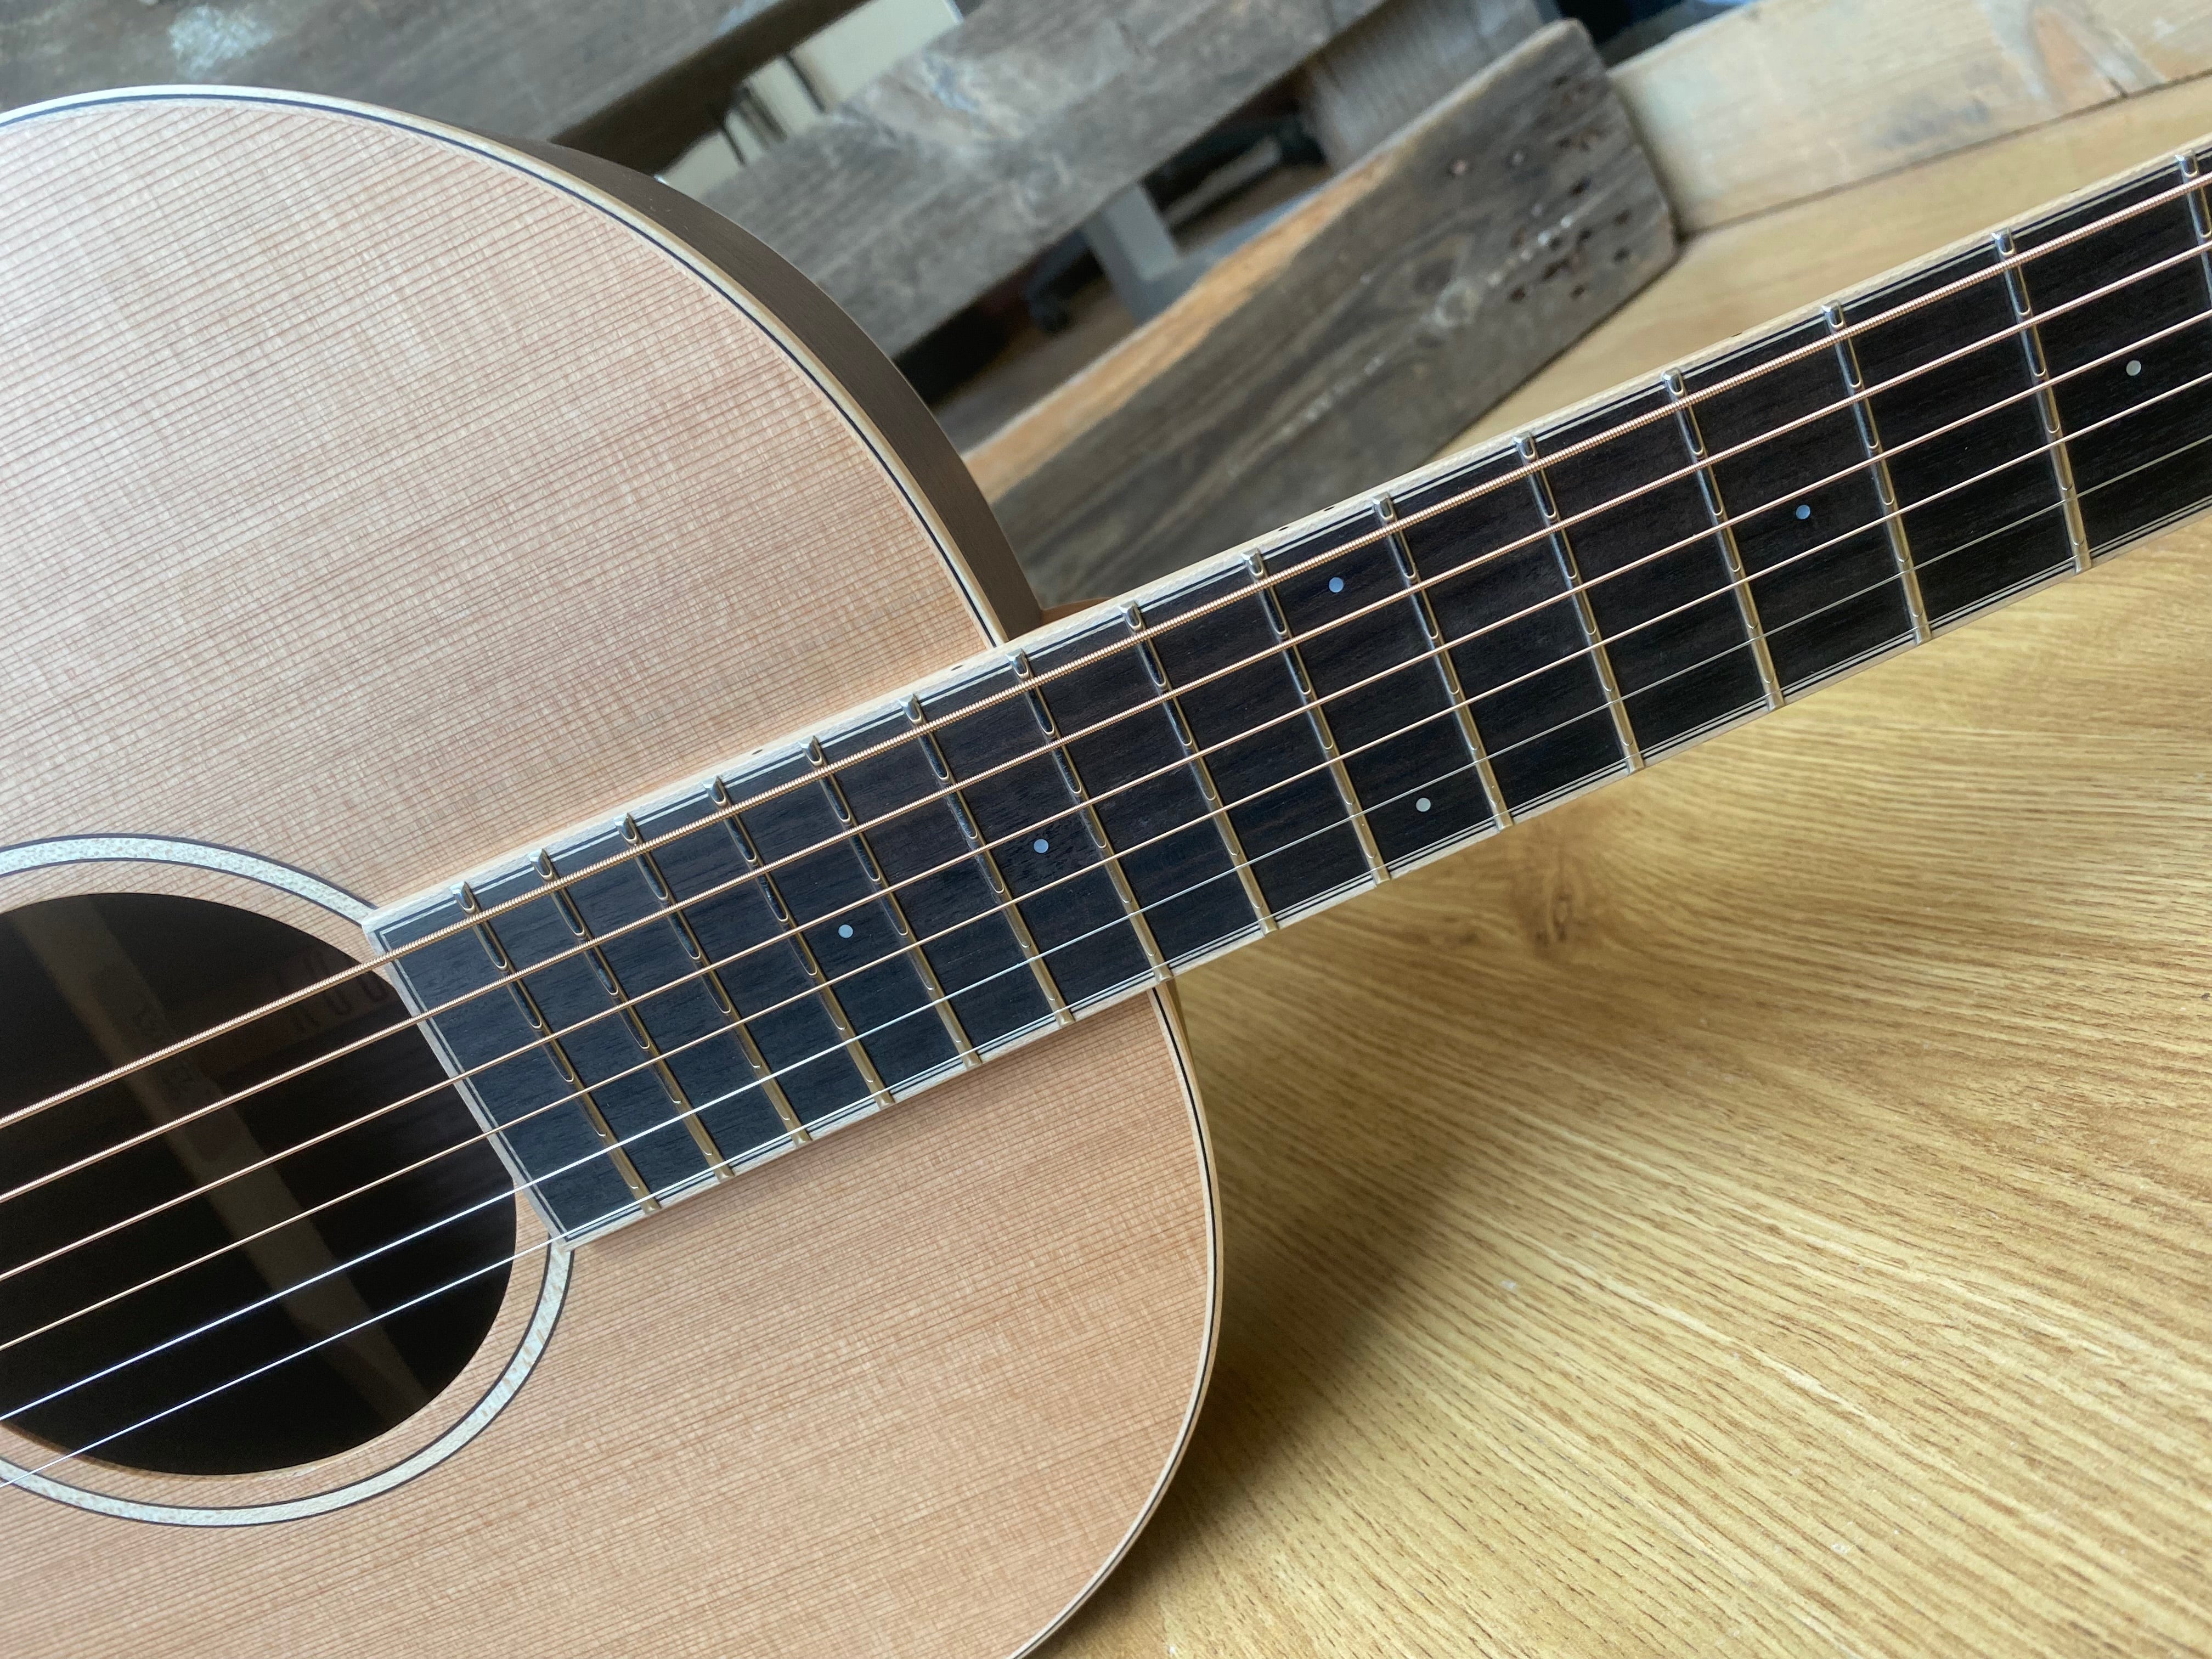 Auden Neo 45 Chester Cedar/Rosewood Full body., Electro Acoustic Guitar for sale at Richards Guitars.